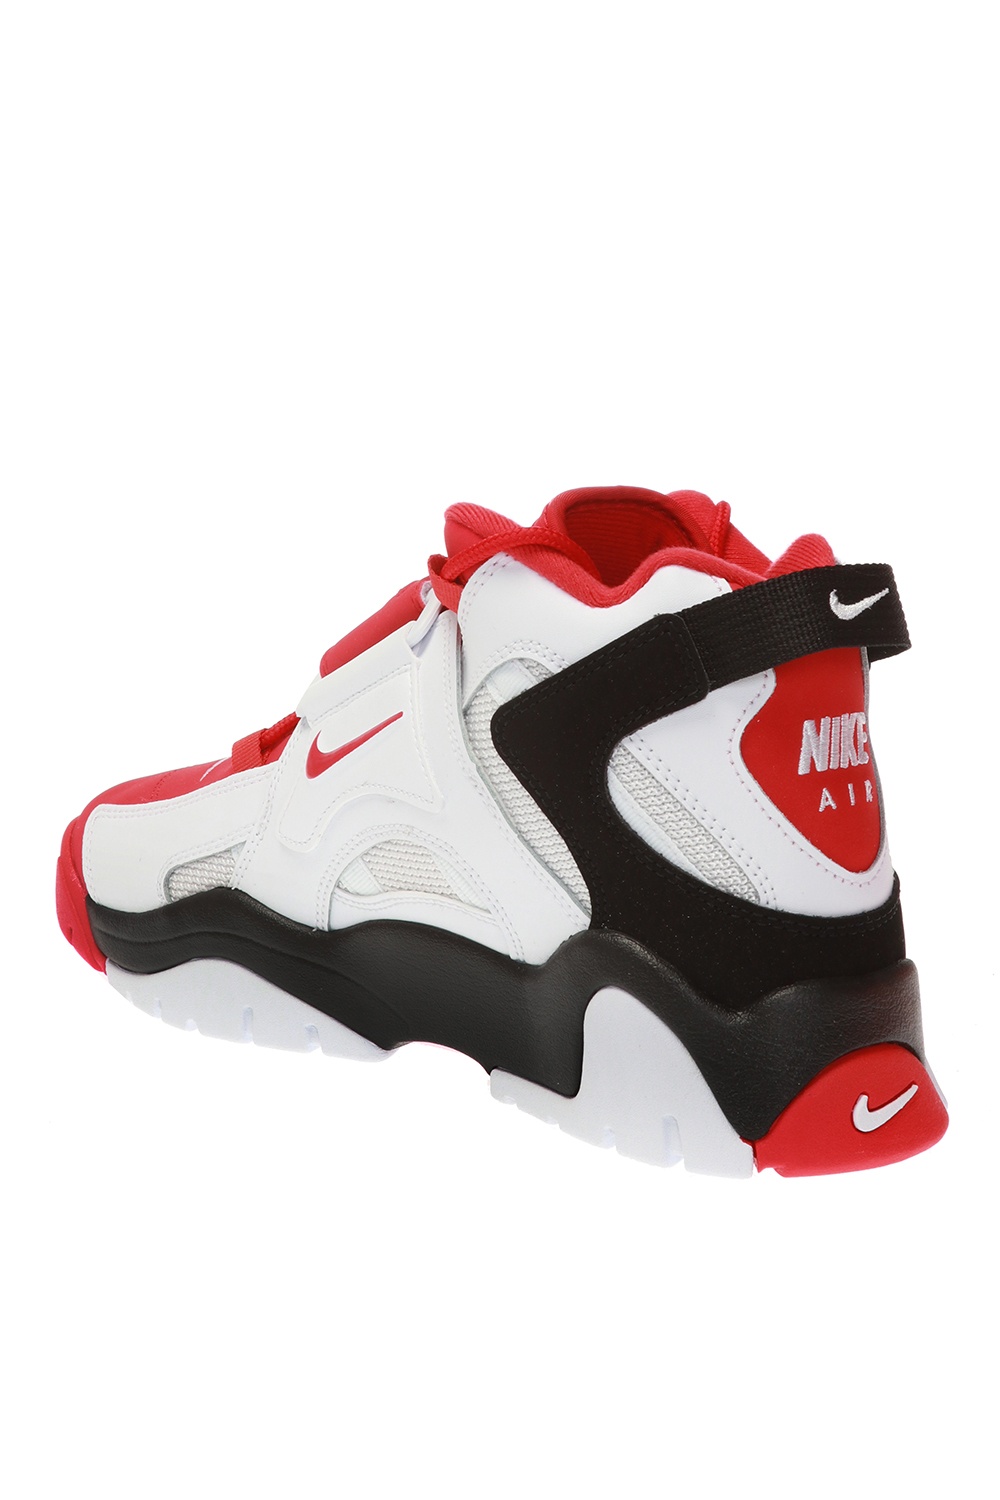 Nike Air Barrage Mid Shoe White University Red Black AT7847-102 Mens 7 W 9